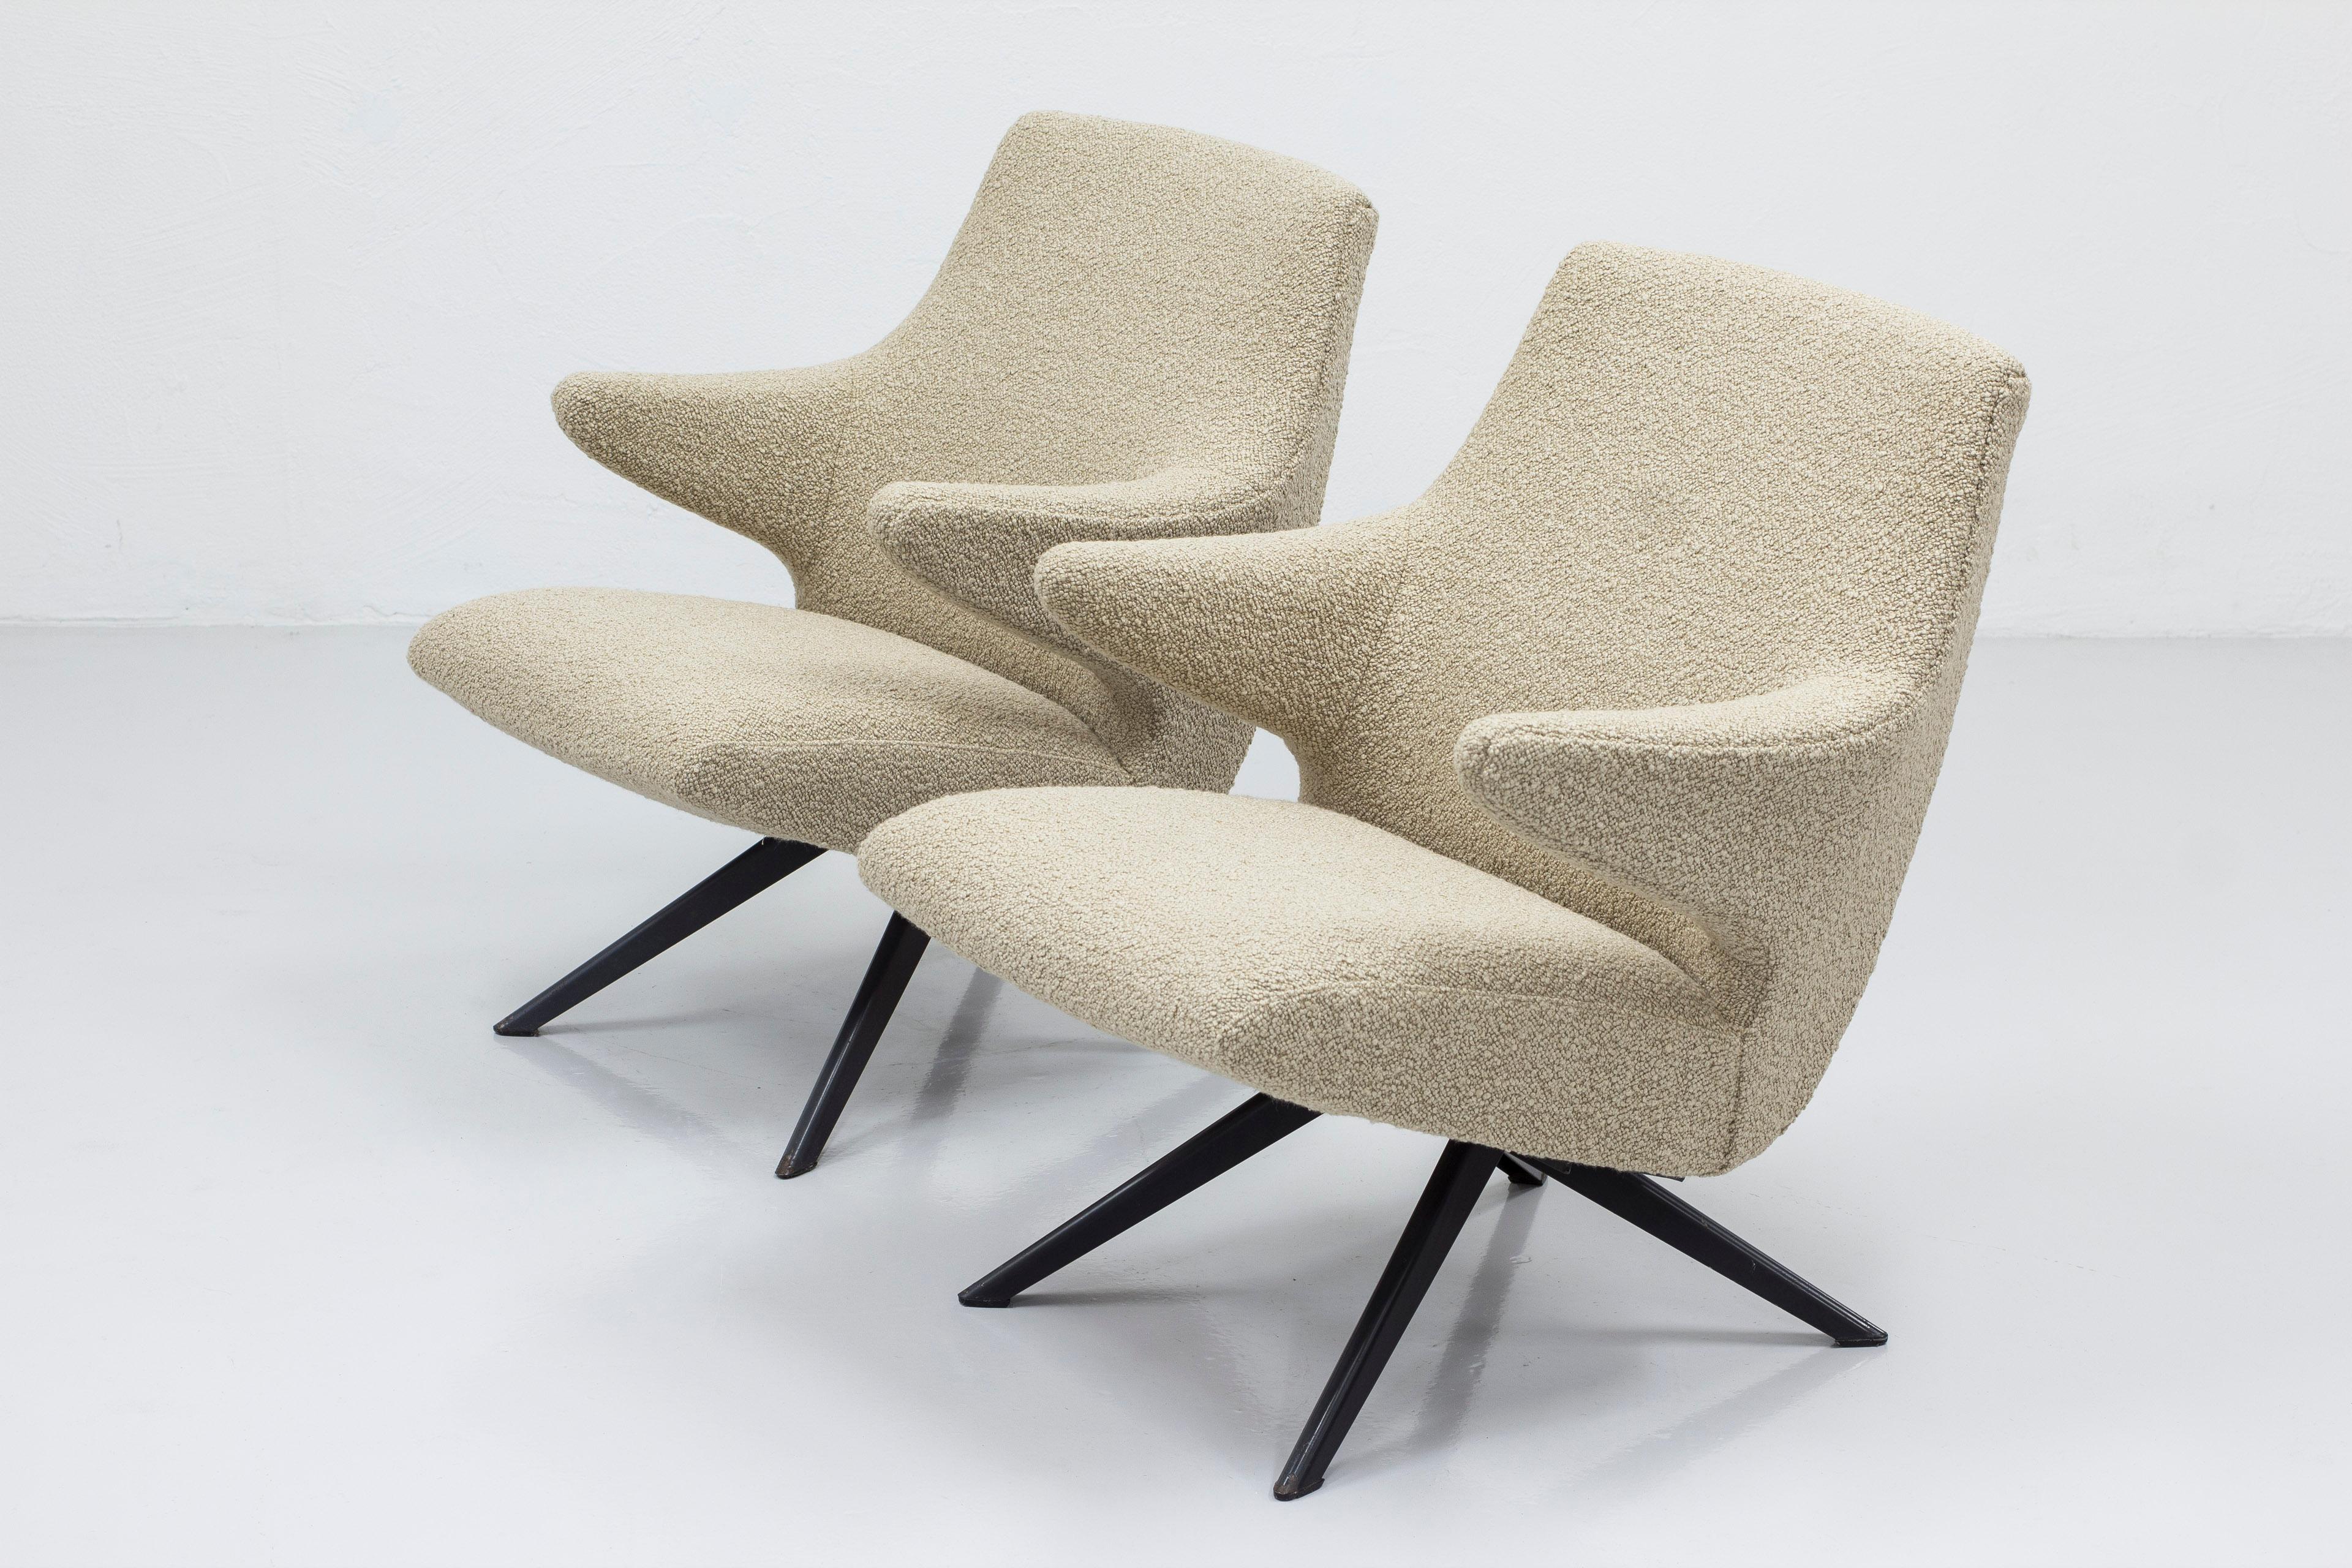 Very rare pair of lounge chairs designed by Bengt Ruda. produced by Nordiska Kompaniet during the early 1950s. Dark grey lacquered four pod steel base and organic spring and foam seats. Reupholstered with Krakorum bouclé fabric from Dedar. Very good